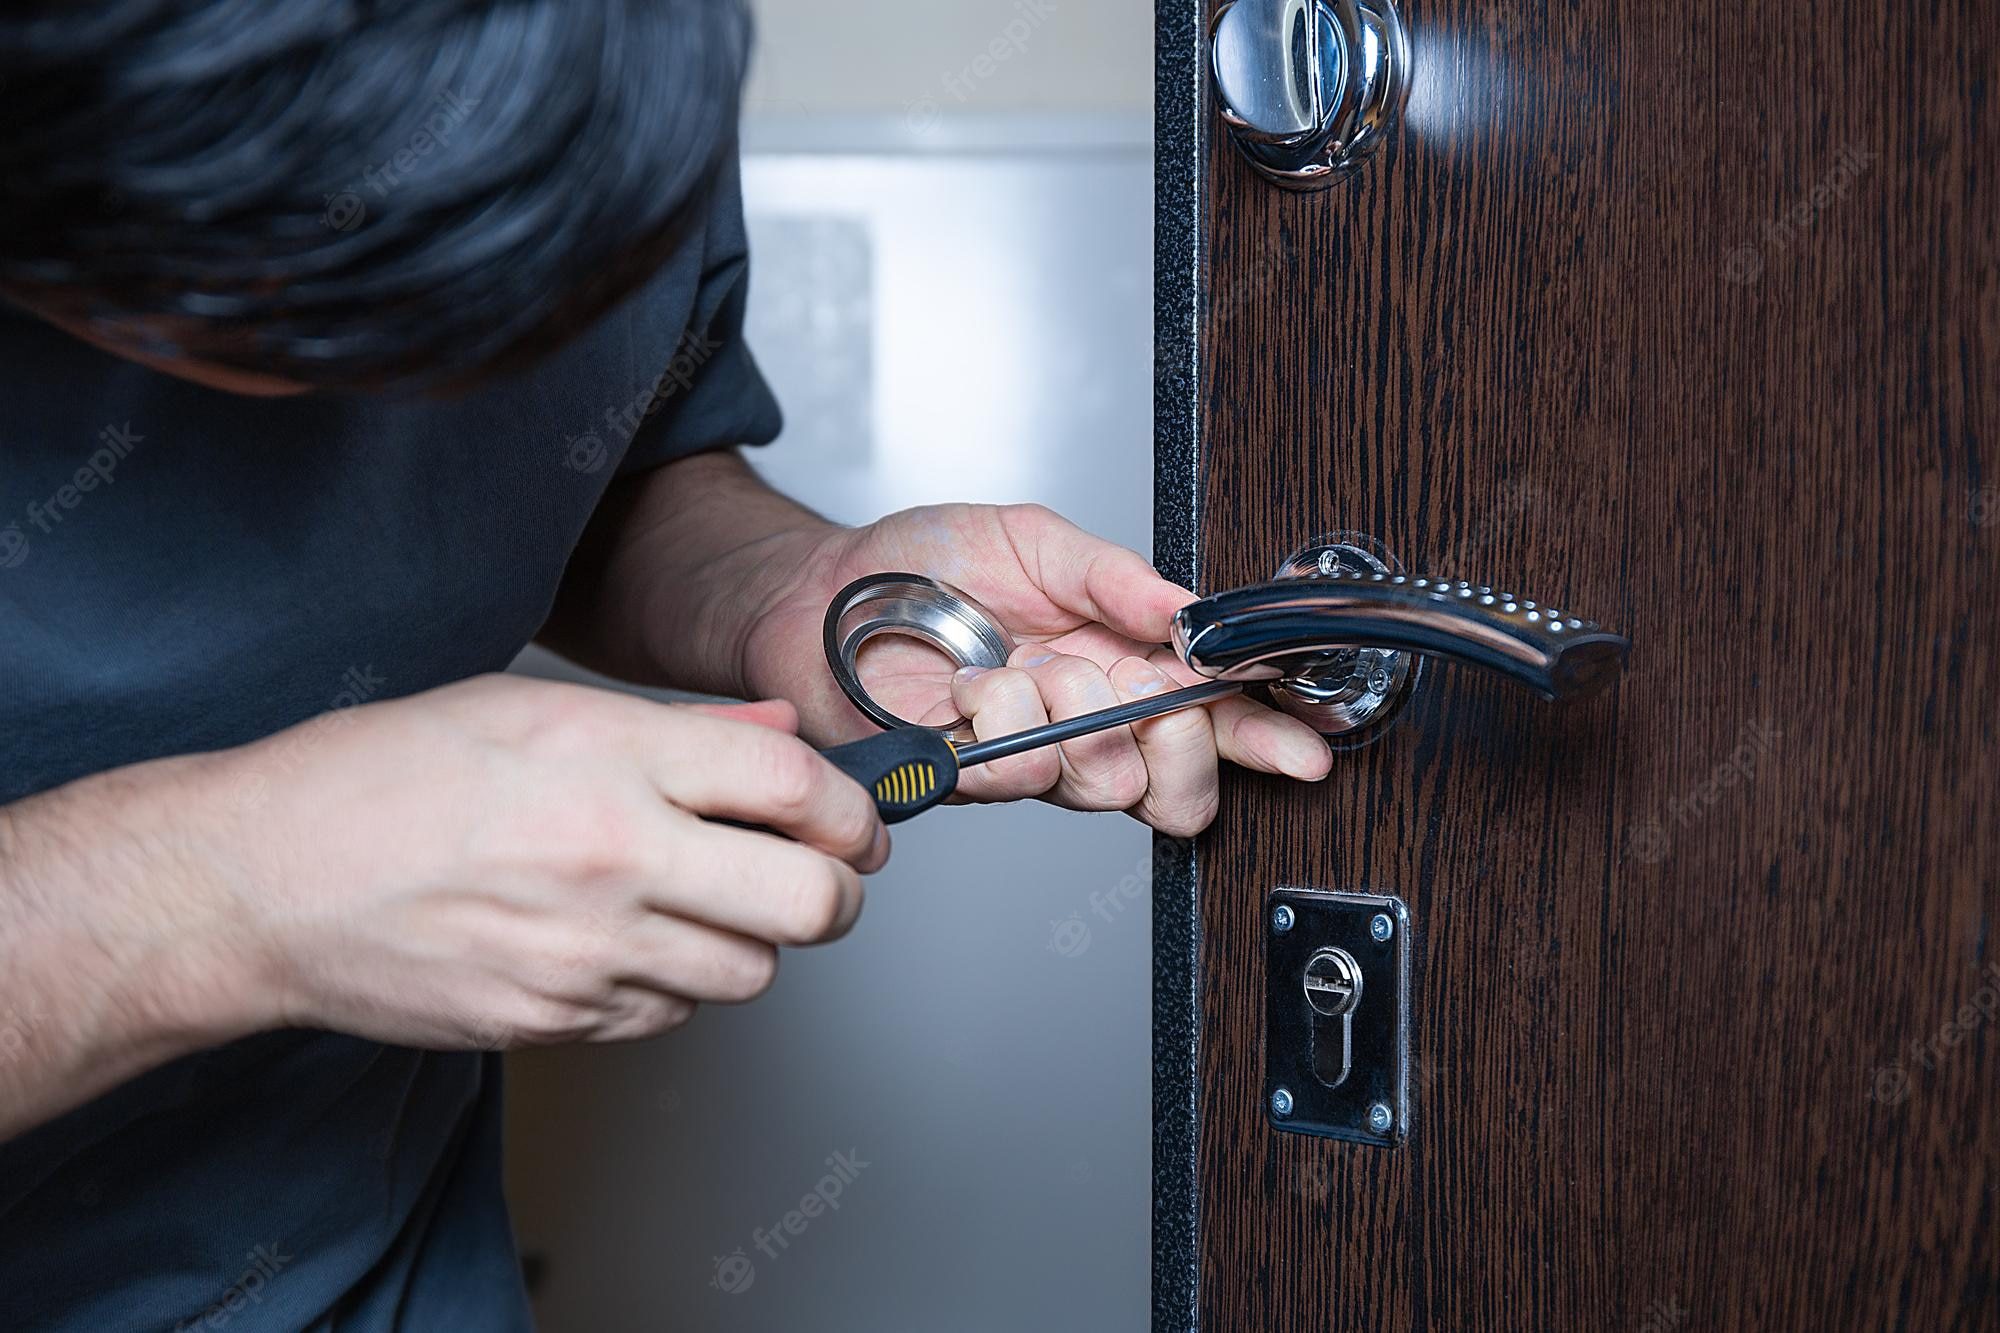 Coral Springs 24/7 Locksmith – Why us?